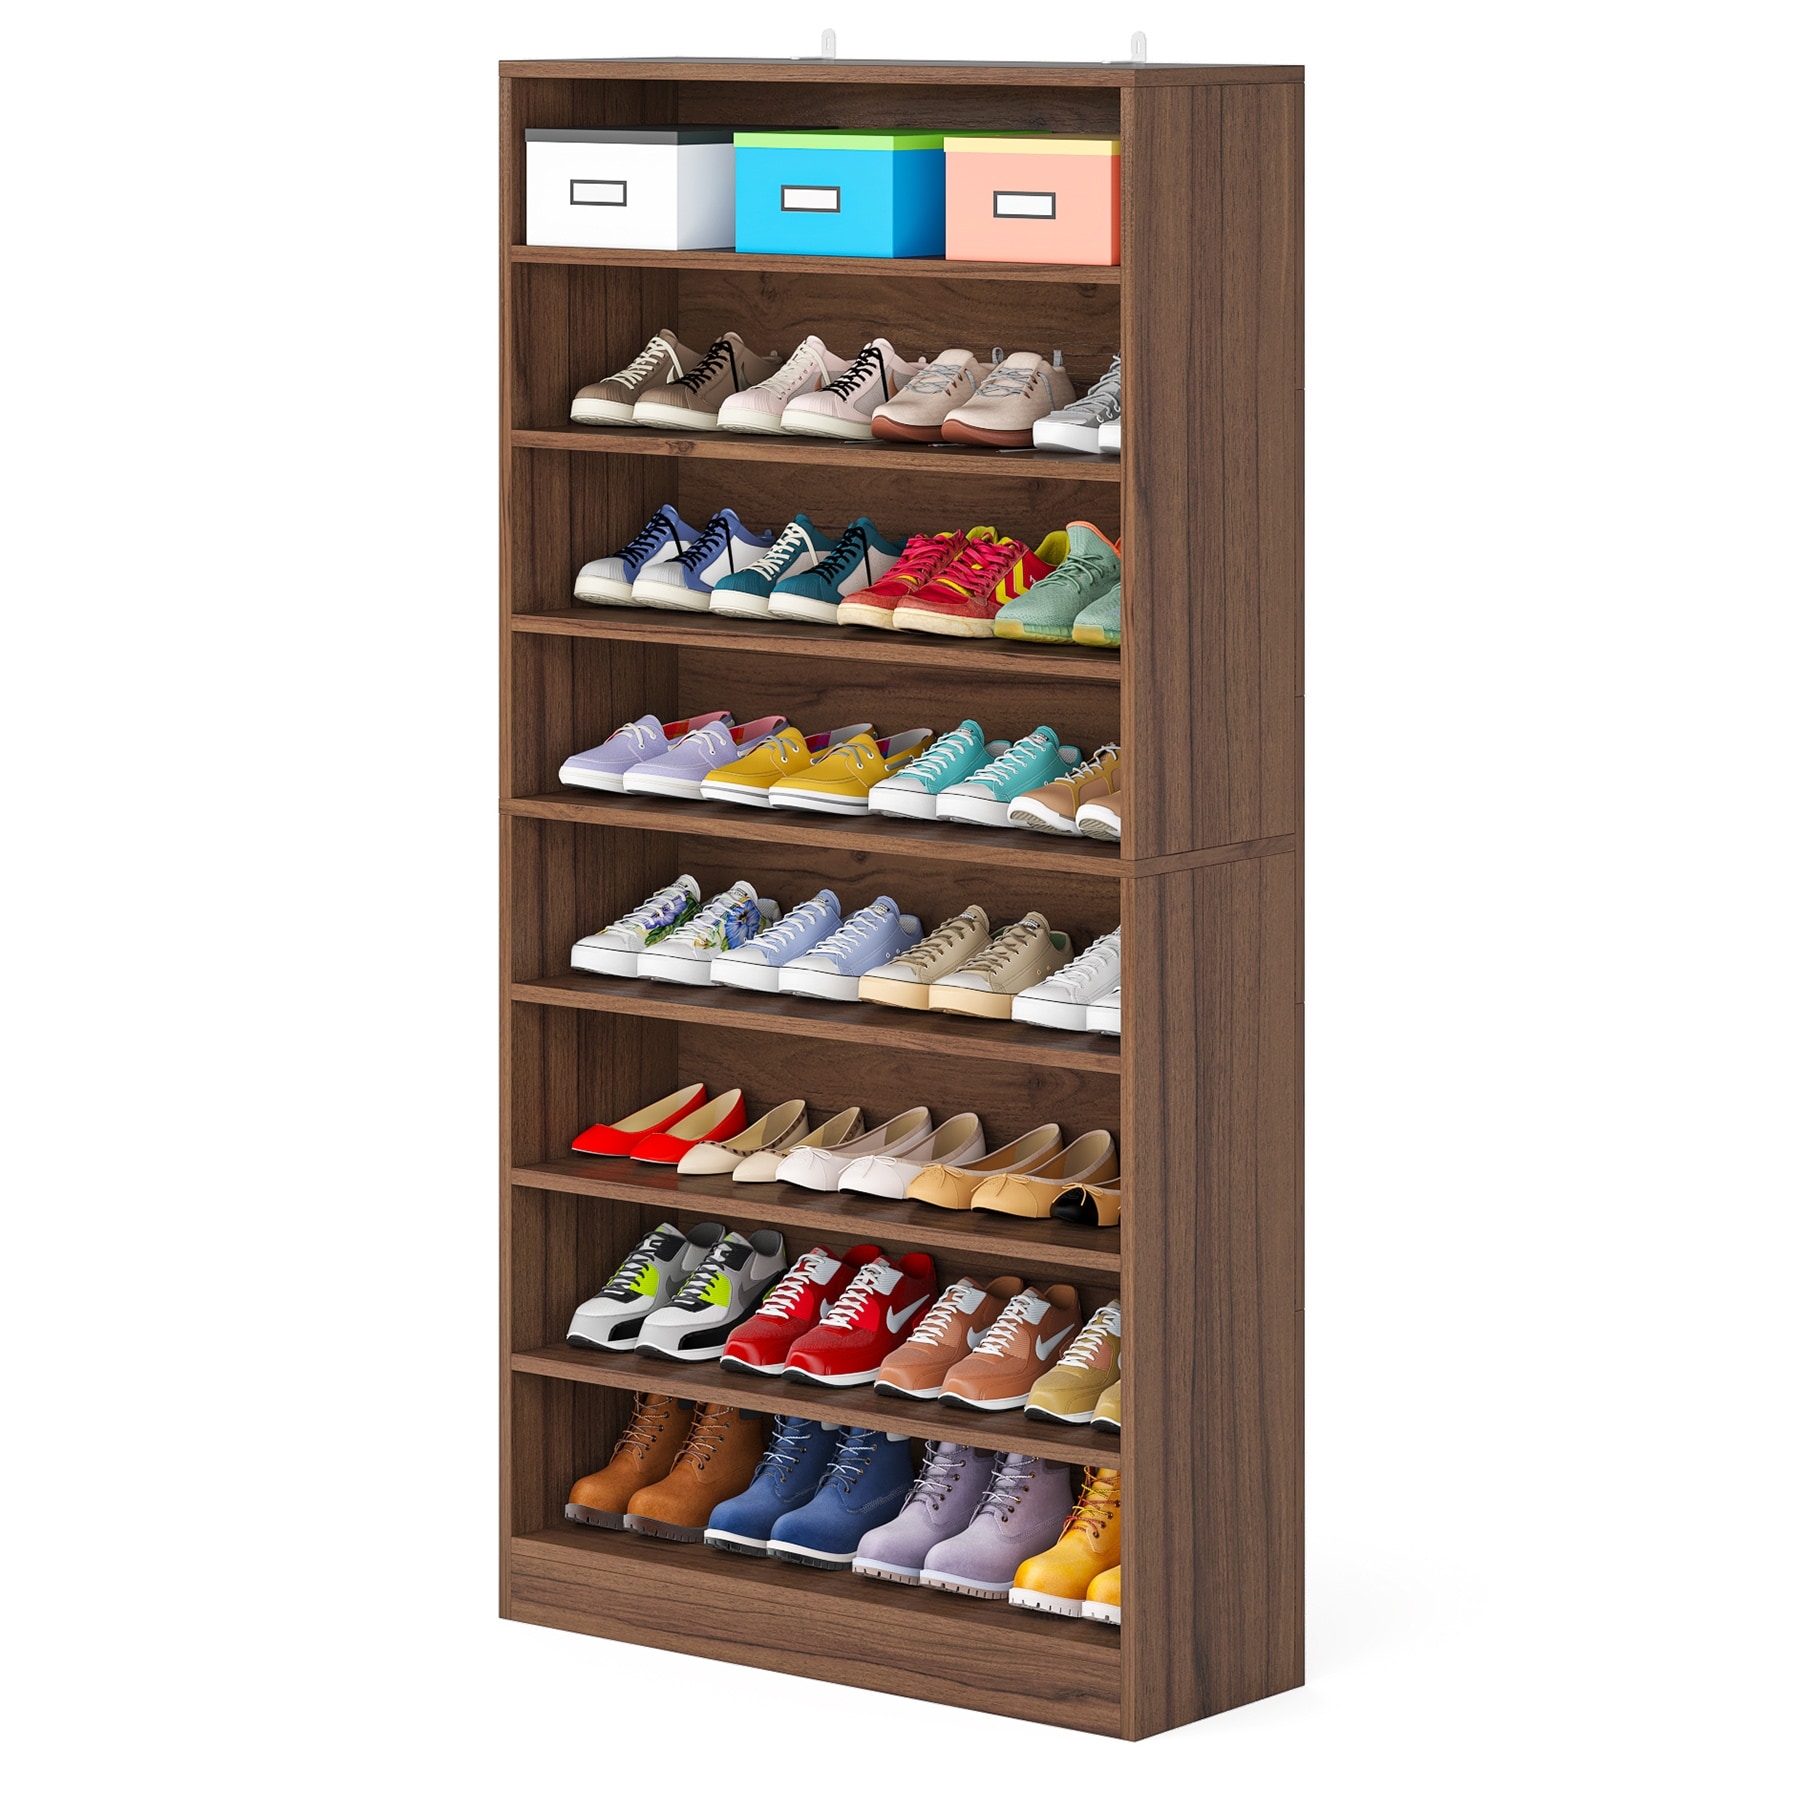 https://ak1.ostkcdn.com/images/products/is/images/direct/91669554dde42d281b47b69294ef57f70b8af4d1/Shoe-Cabinet%2C9-Tiers-Tall-Shoes-Storage-Rack-Cabinets%2CWood-Shoe-Stand-with-Open-Shelf-for-Entryway.jpg